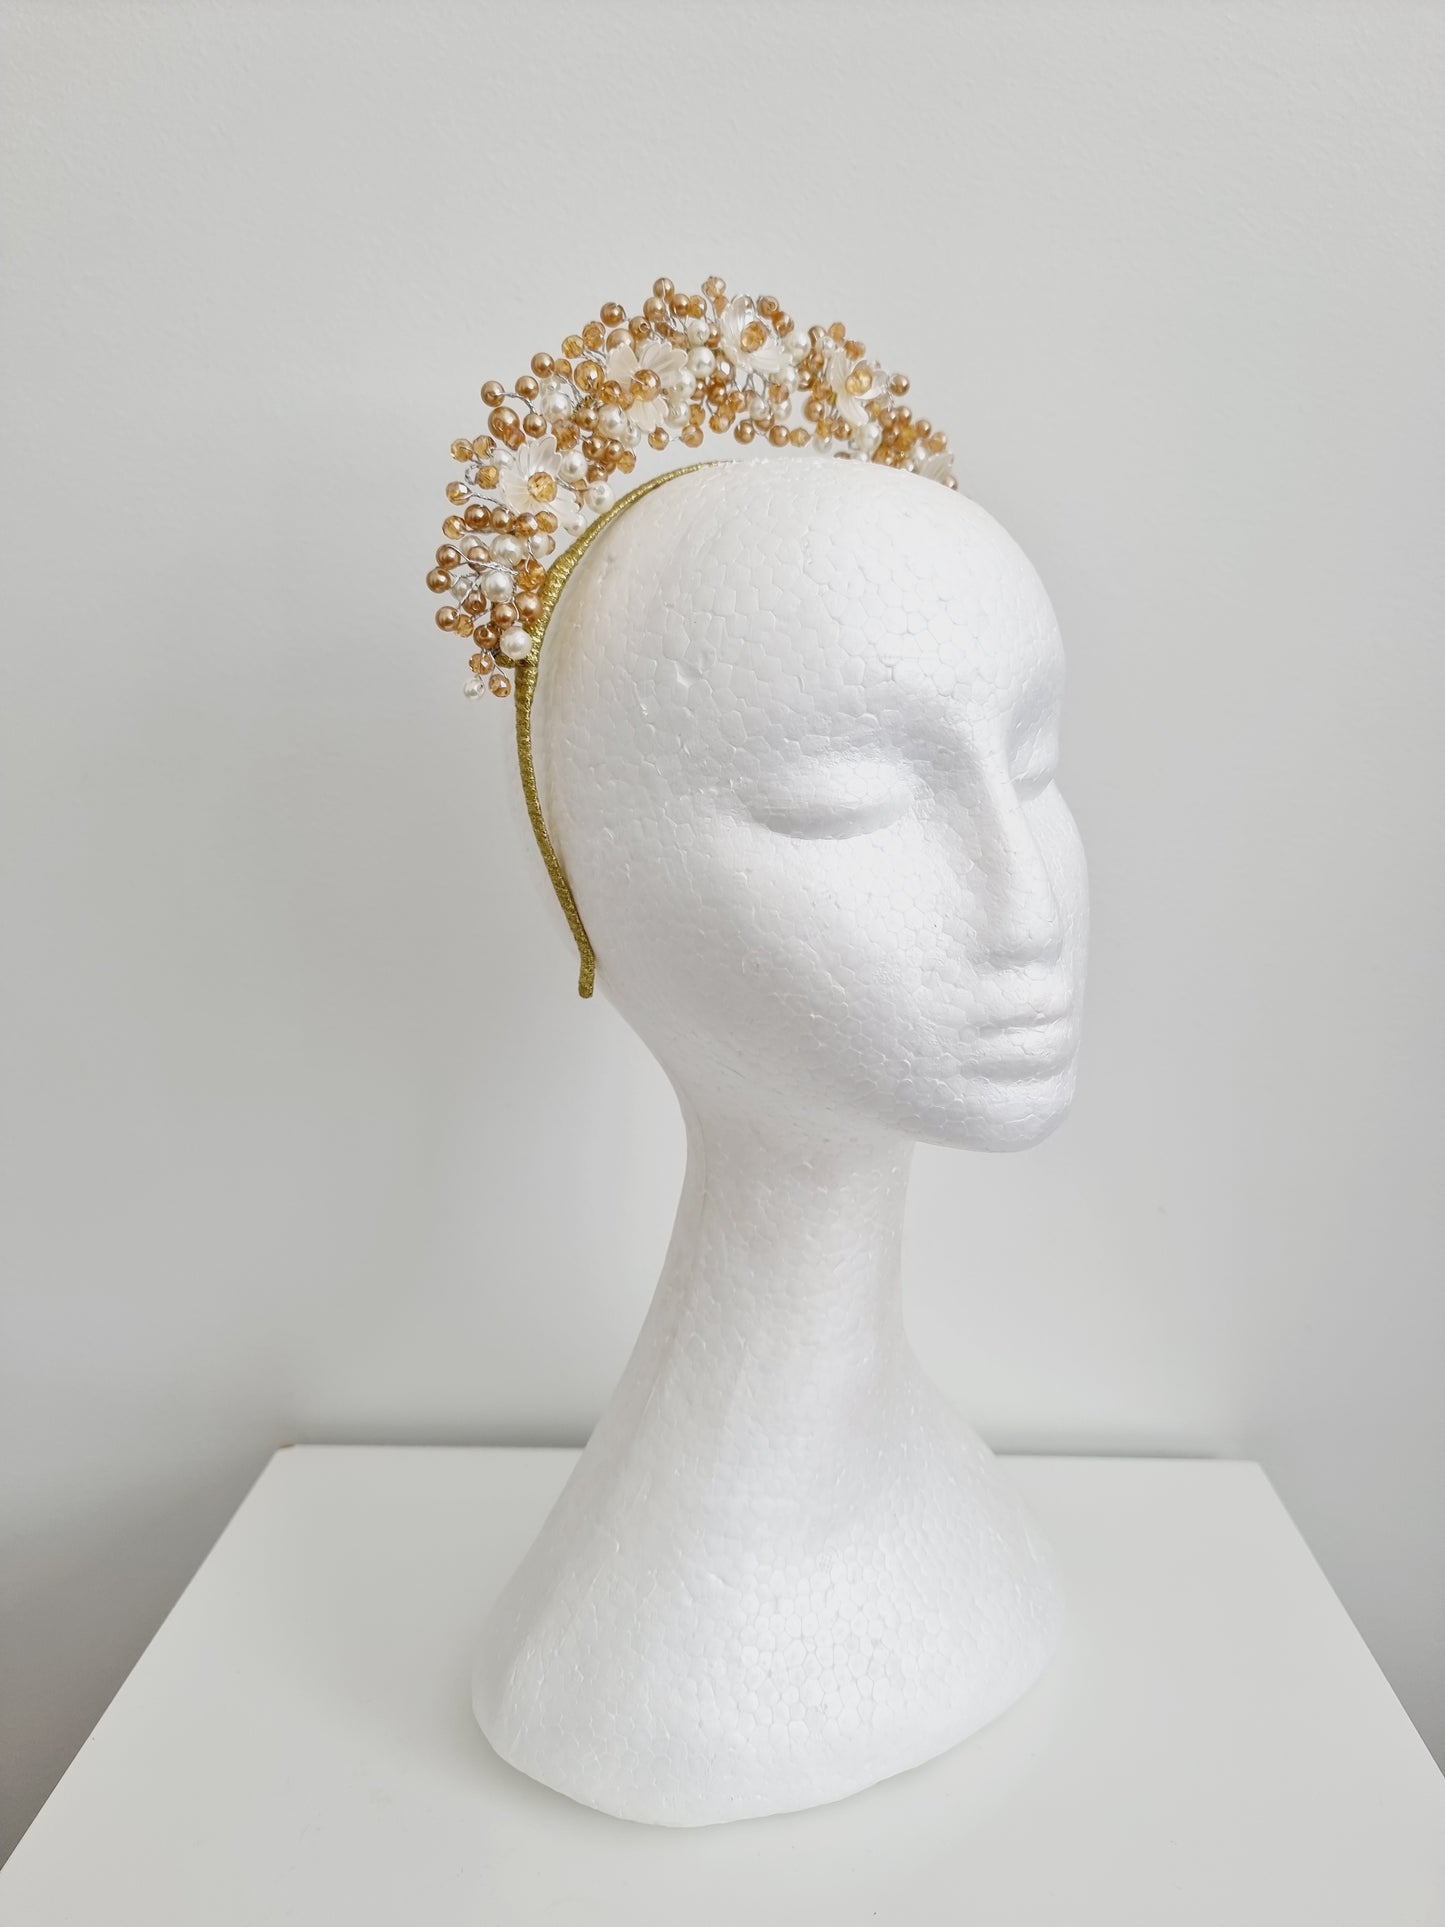 Miss Sienna. Womens pearl and crystal beaded headband fascinator in Gold / ivory